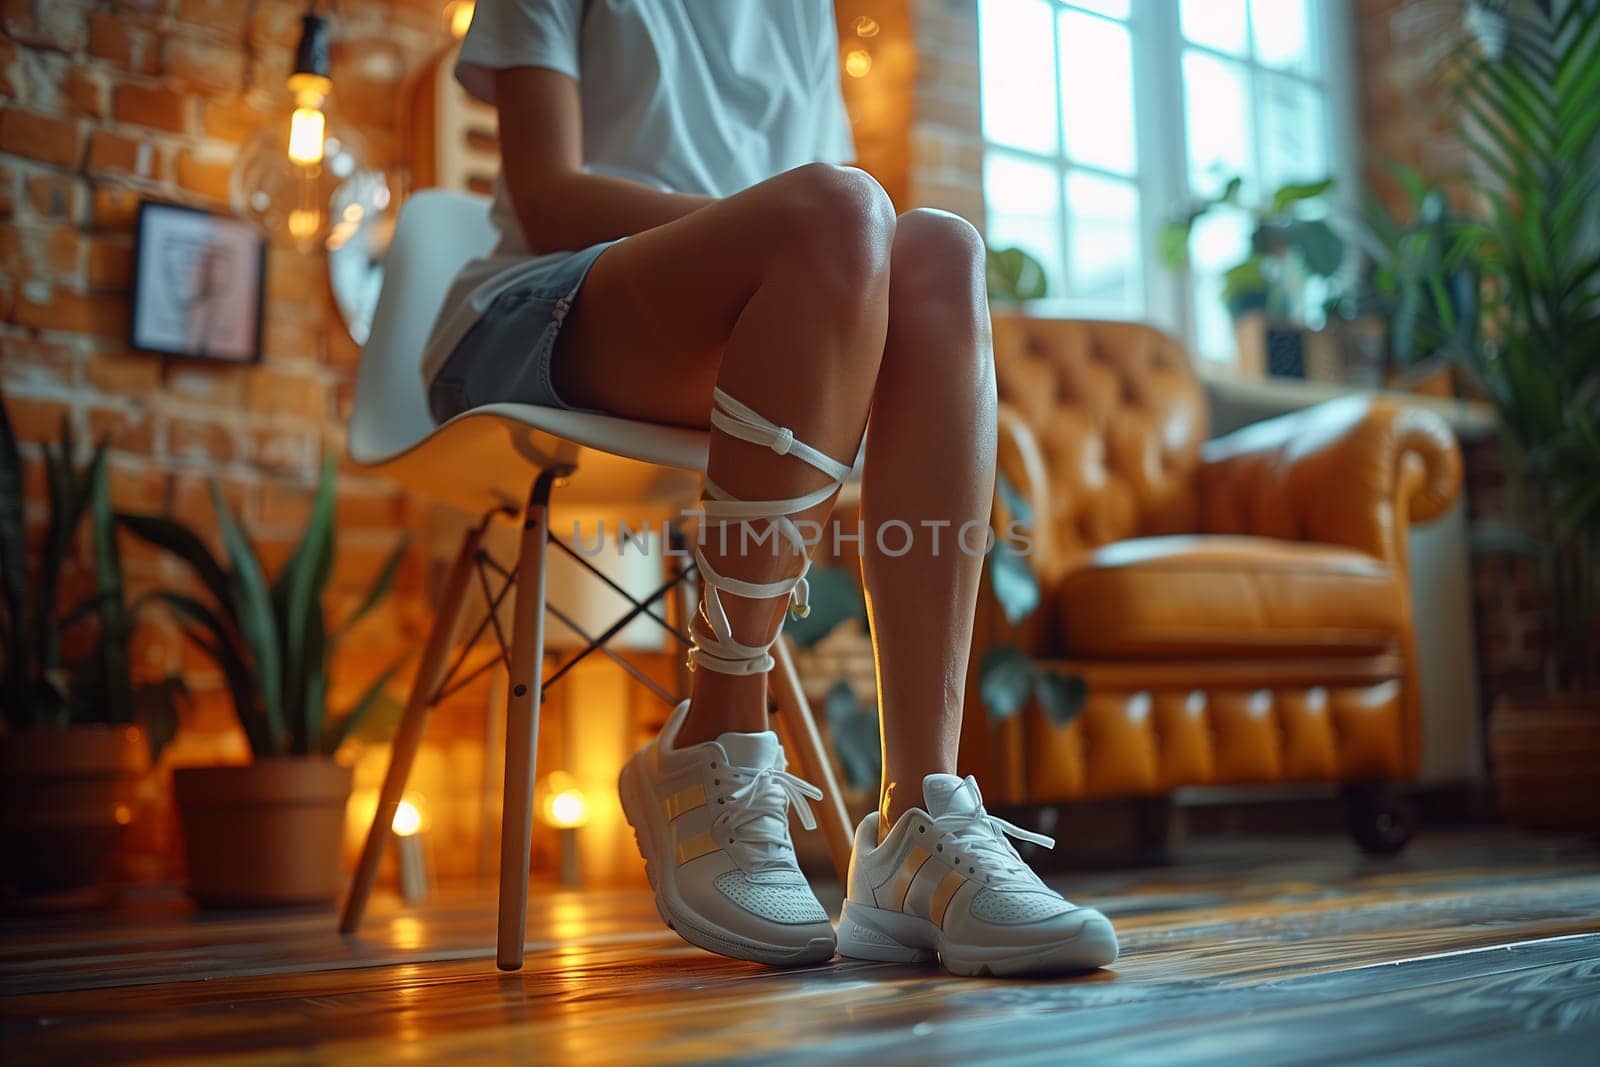 A woman is comfortably seated in a chair with her legs crossed, overlooking a window with a houseplant on the wood flooring, showcasing a modern interior design in a building